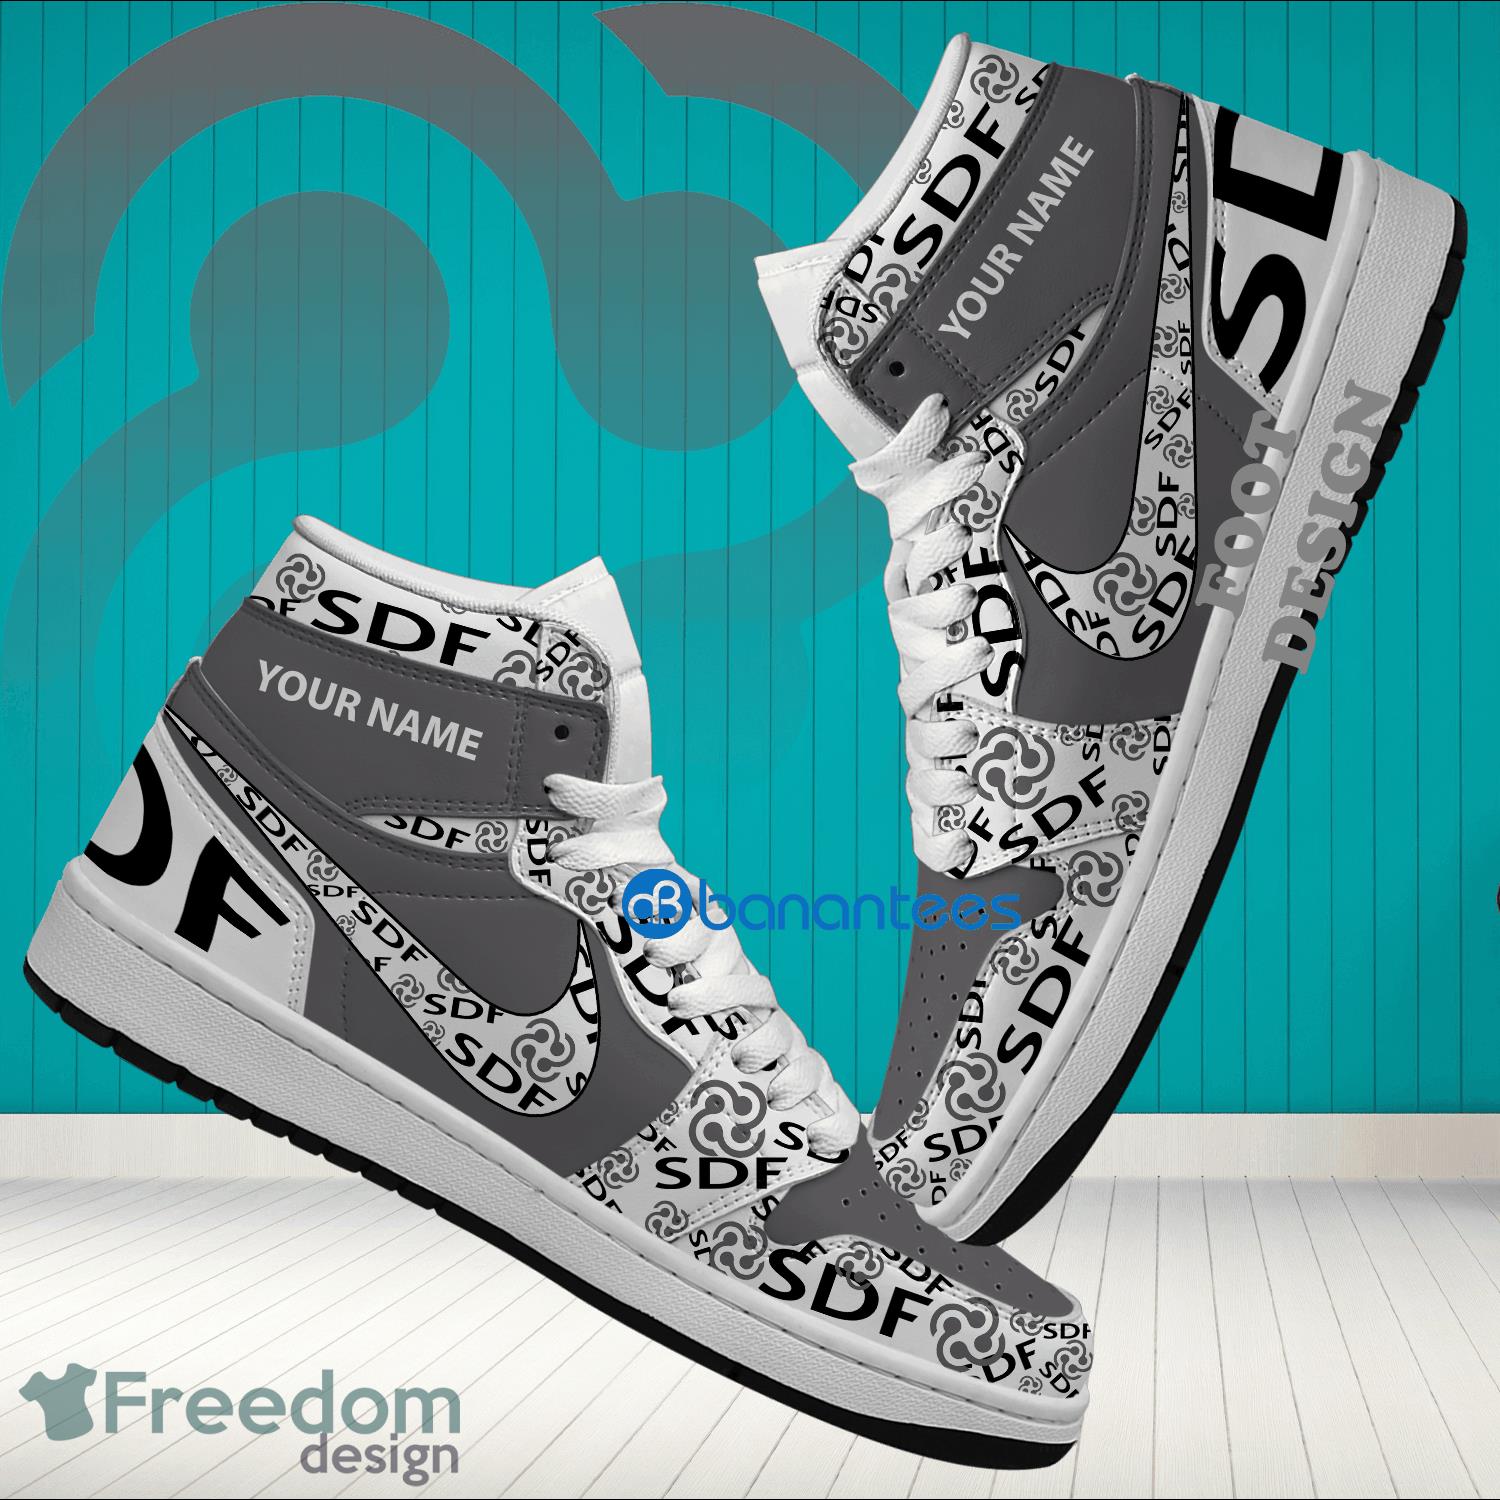 Personalized Truck Farmer SDF group Logo Air Jordan Hightop 1 Shoes For Sneakers Fans - Truck Farmer SDF group Logo Air Jordan Hightop 1 Shoes Personalized Photo 1